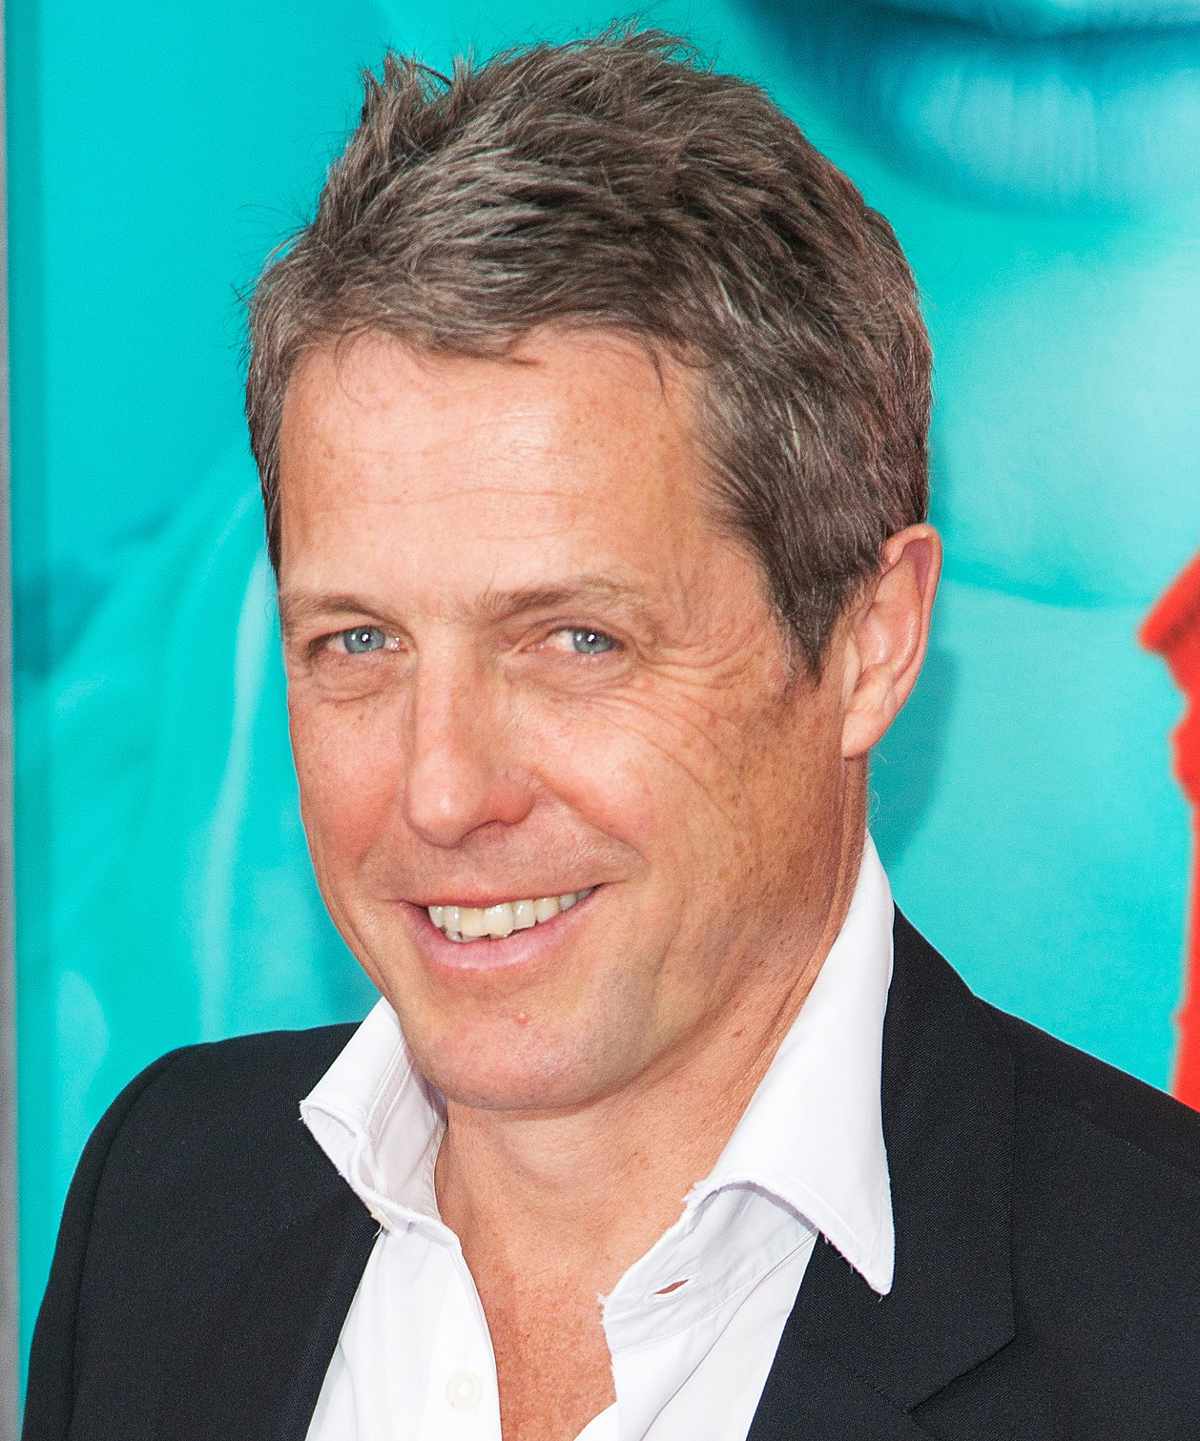 Actor Hugh Grant attends "The Man From U.N.C.L.E." New York premiere at Ziegfeld Theater on August 10, 2015 in New York City.